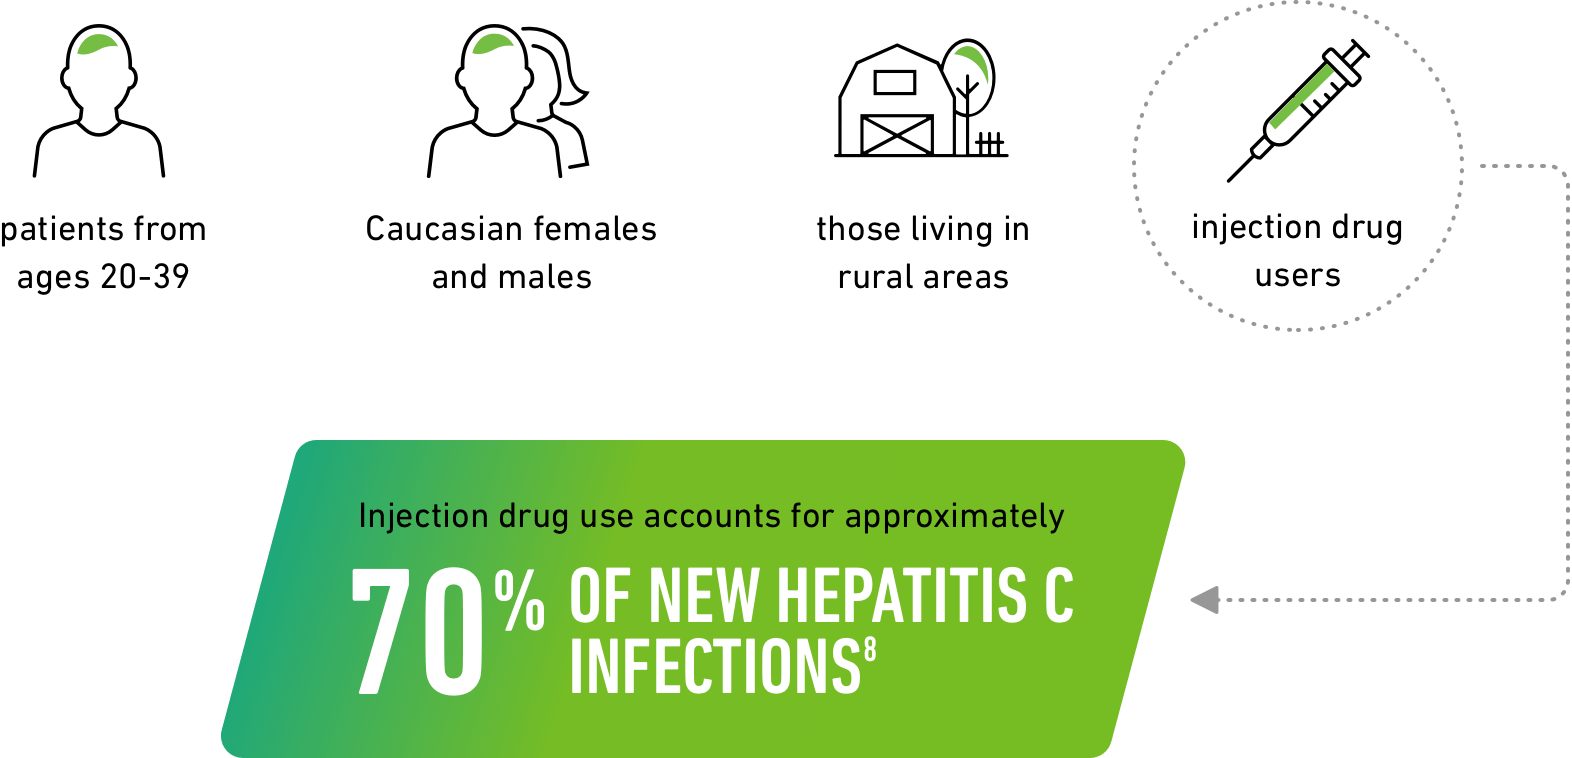 New HCV infections are rapidly increasing among patients from ages 20 to 39, Caucasian females and males, those living in rural areas and injection drug users.